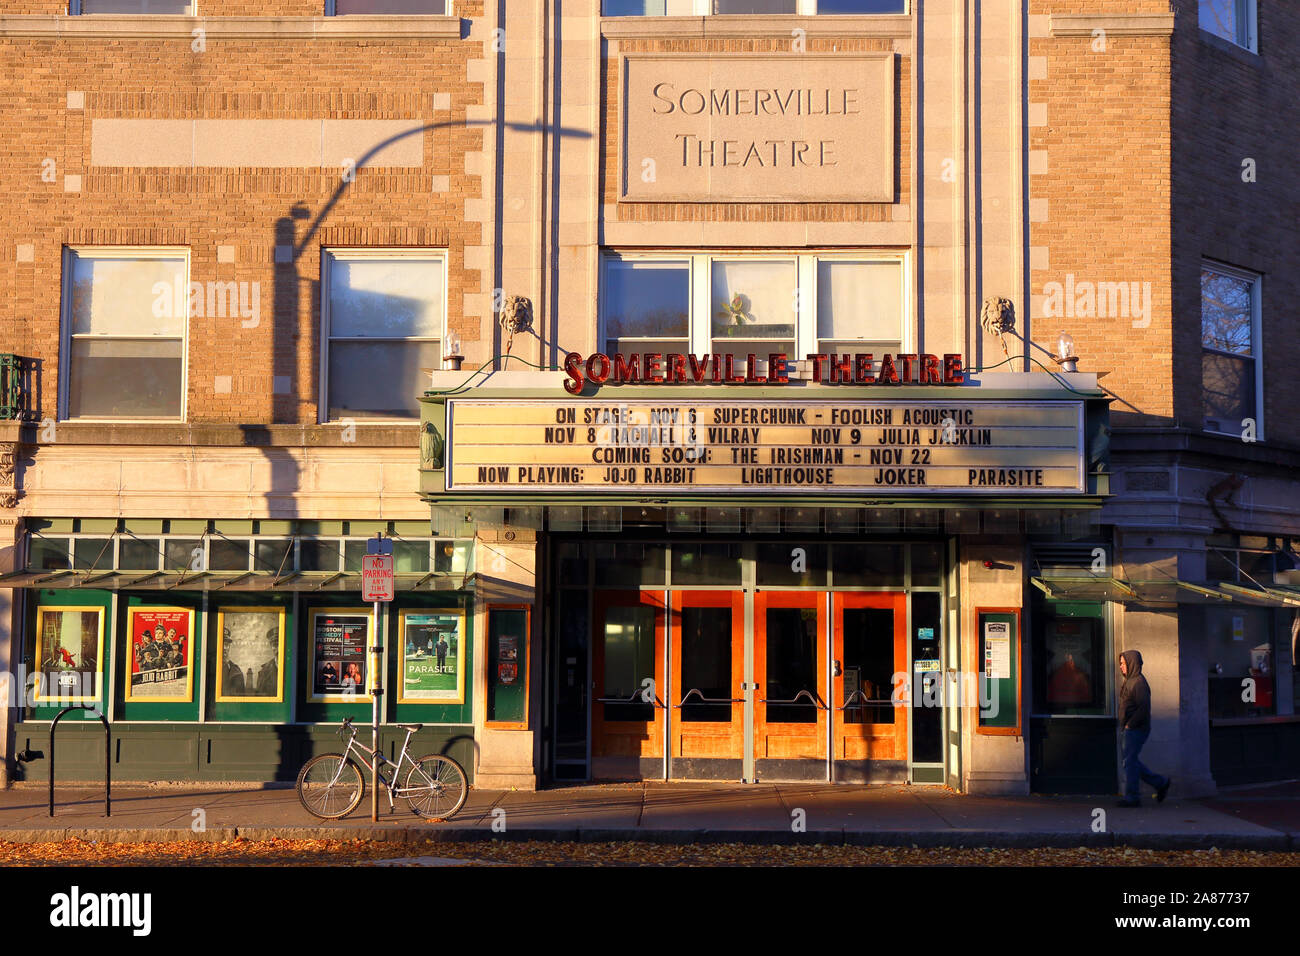 Somerville Theatre, 55 Davis Square, Somerville, MA. exterior storefront of a movie theater and performance space. Stock Photo